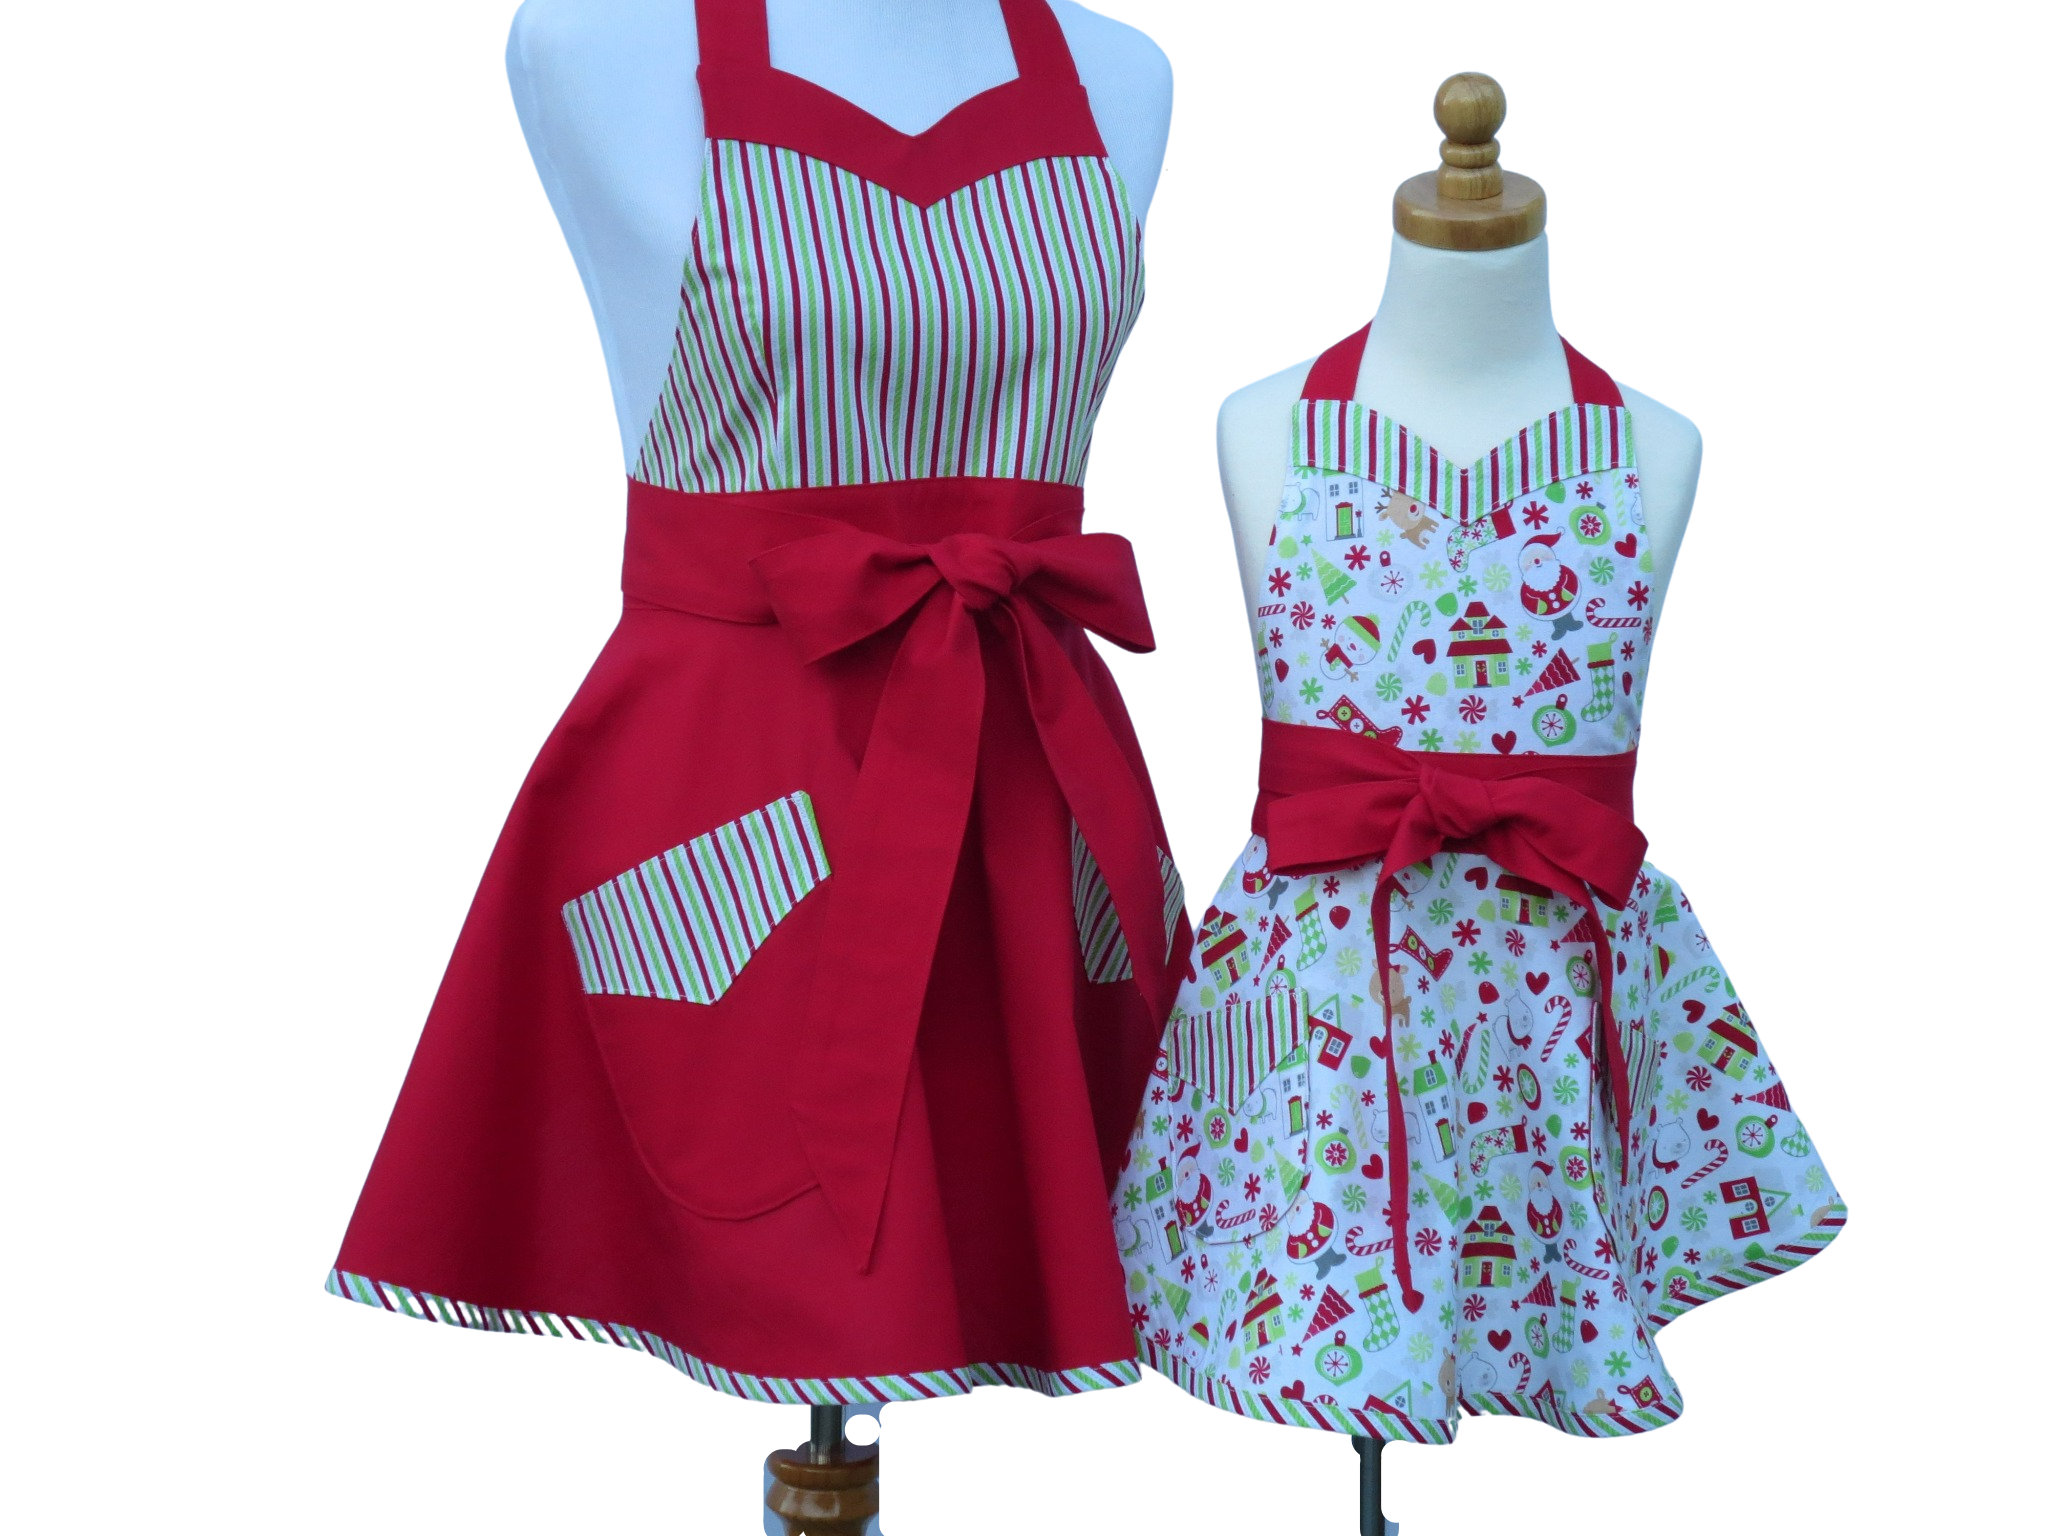 https://www.stitchedbybeverly.com/sites/stitchedbybeverly.indiemade.com/files/mother_daughter_christmas_holiday_retro_style_apron_set_front_views_tied_in_front.jpg